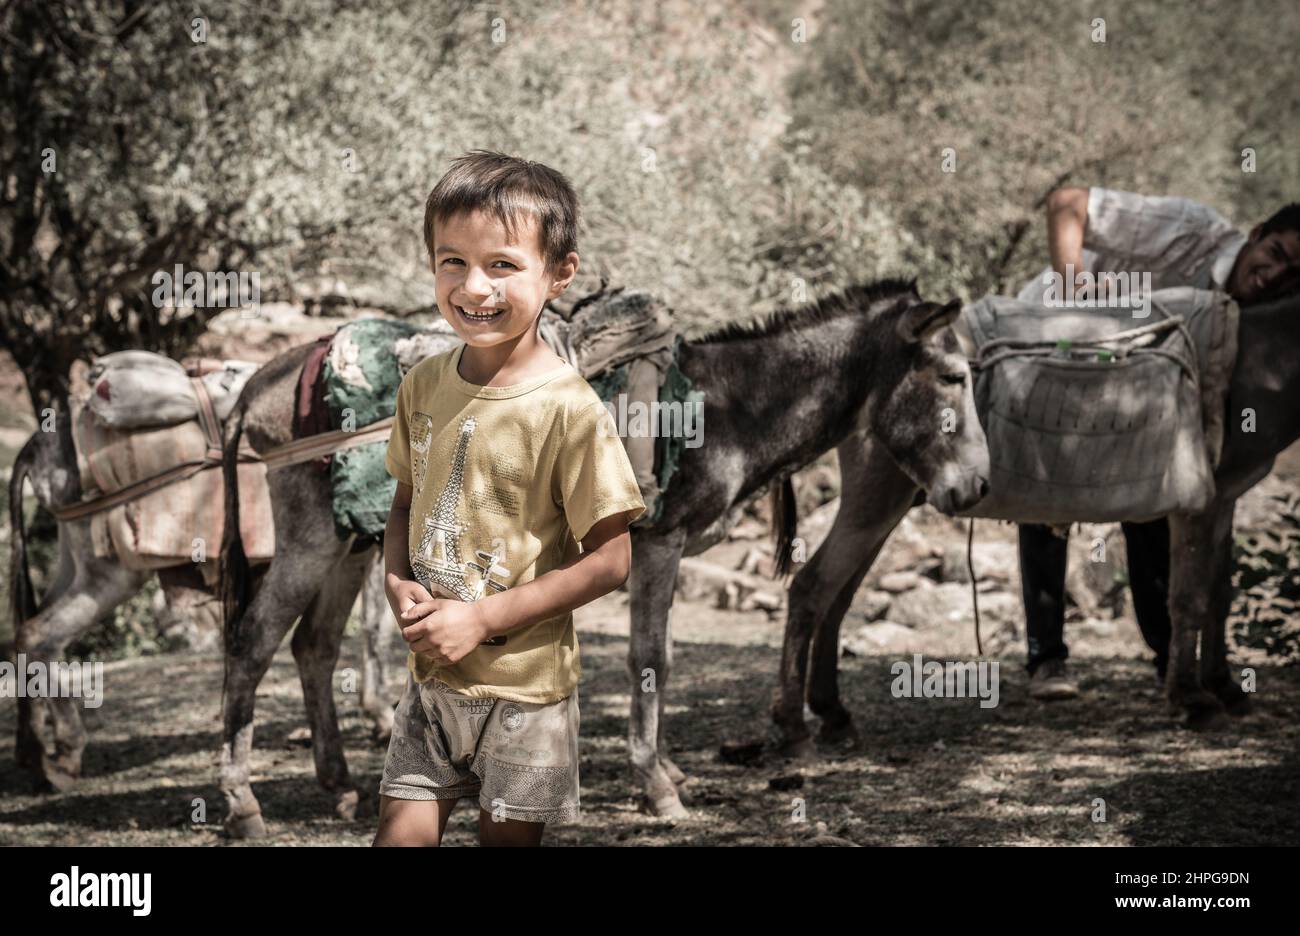 August 25, 2016, Shirkent Valley, Tajikistan: Local boy is posing for the camera as his father attending to pack mules in the background Stock Photo